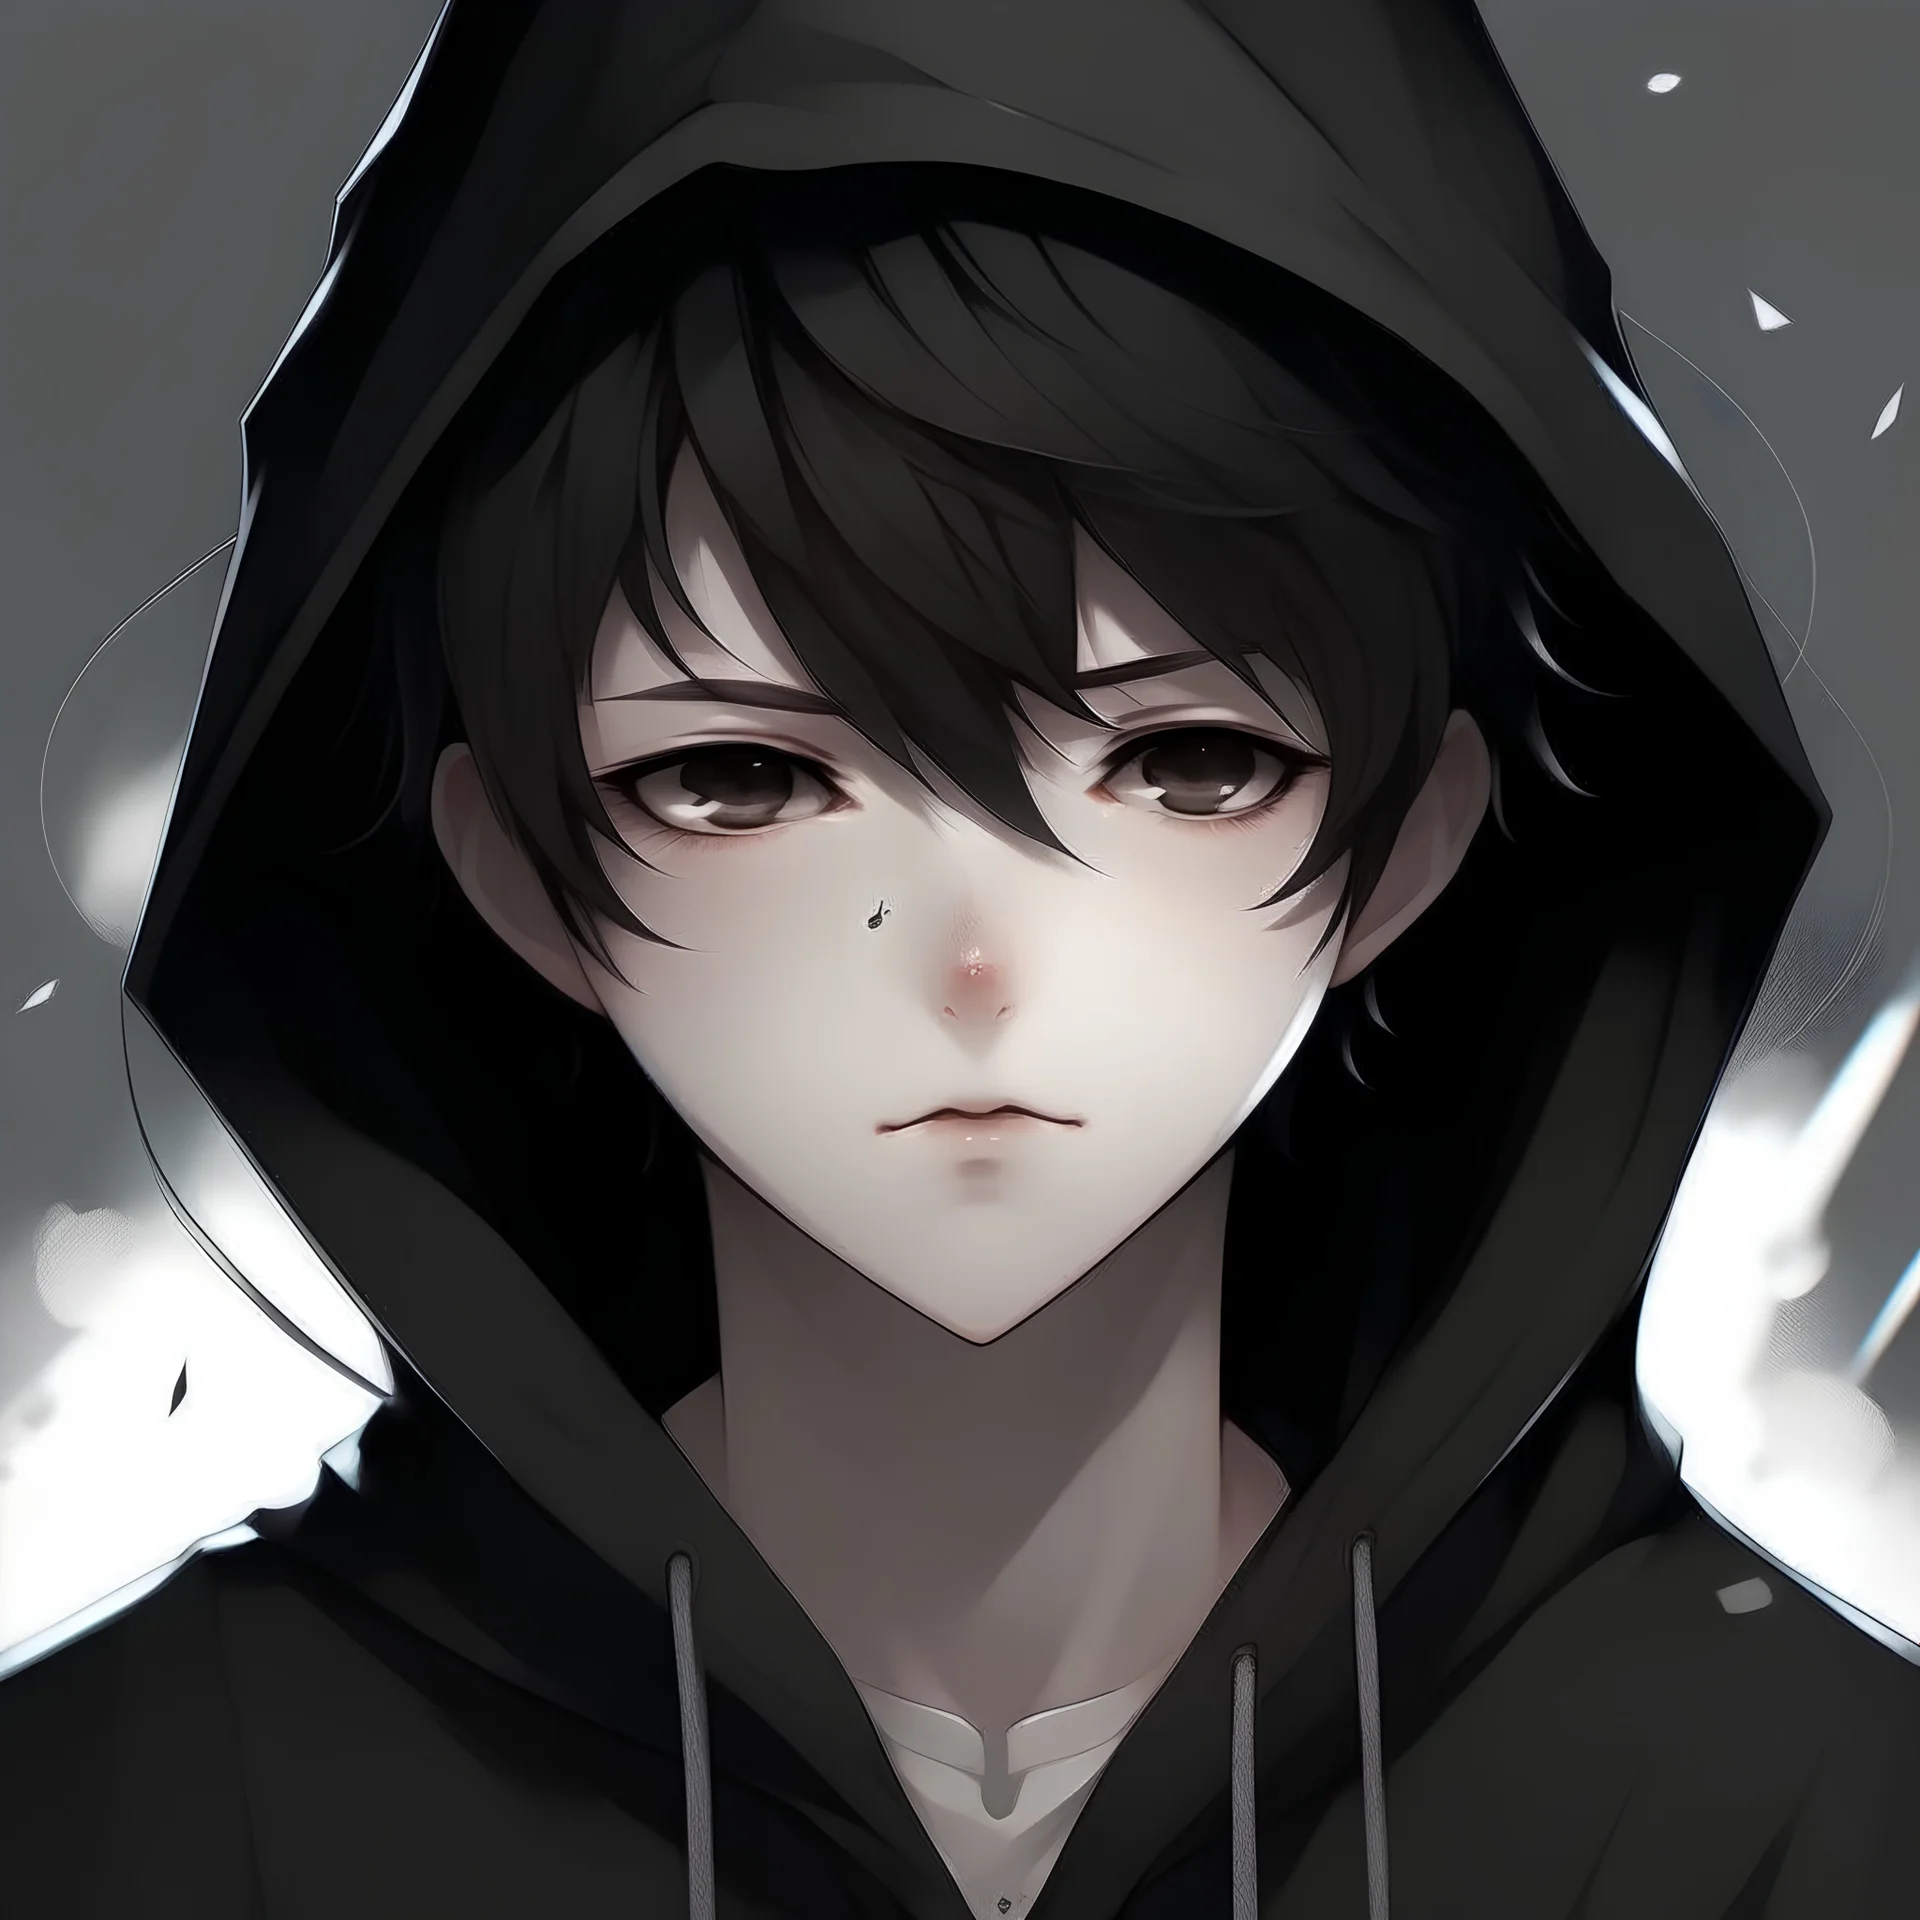 Realistic animated boy with white skin, short and messy hair that is black with white streaks through it, wearing black cloak less kawaii